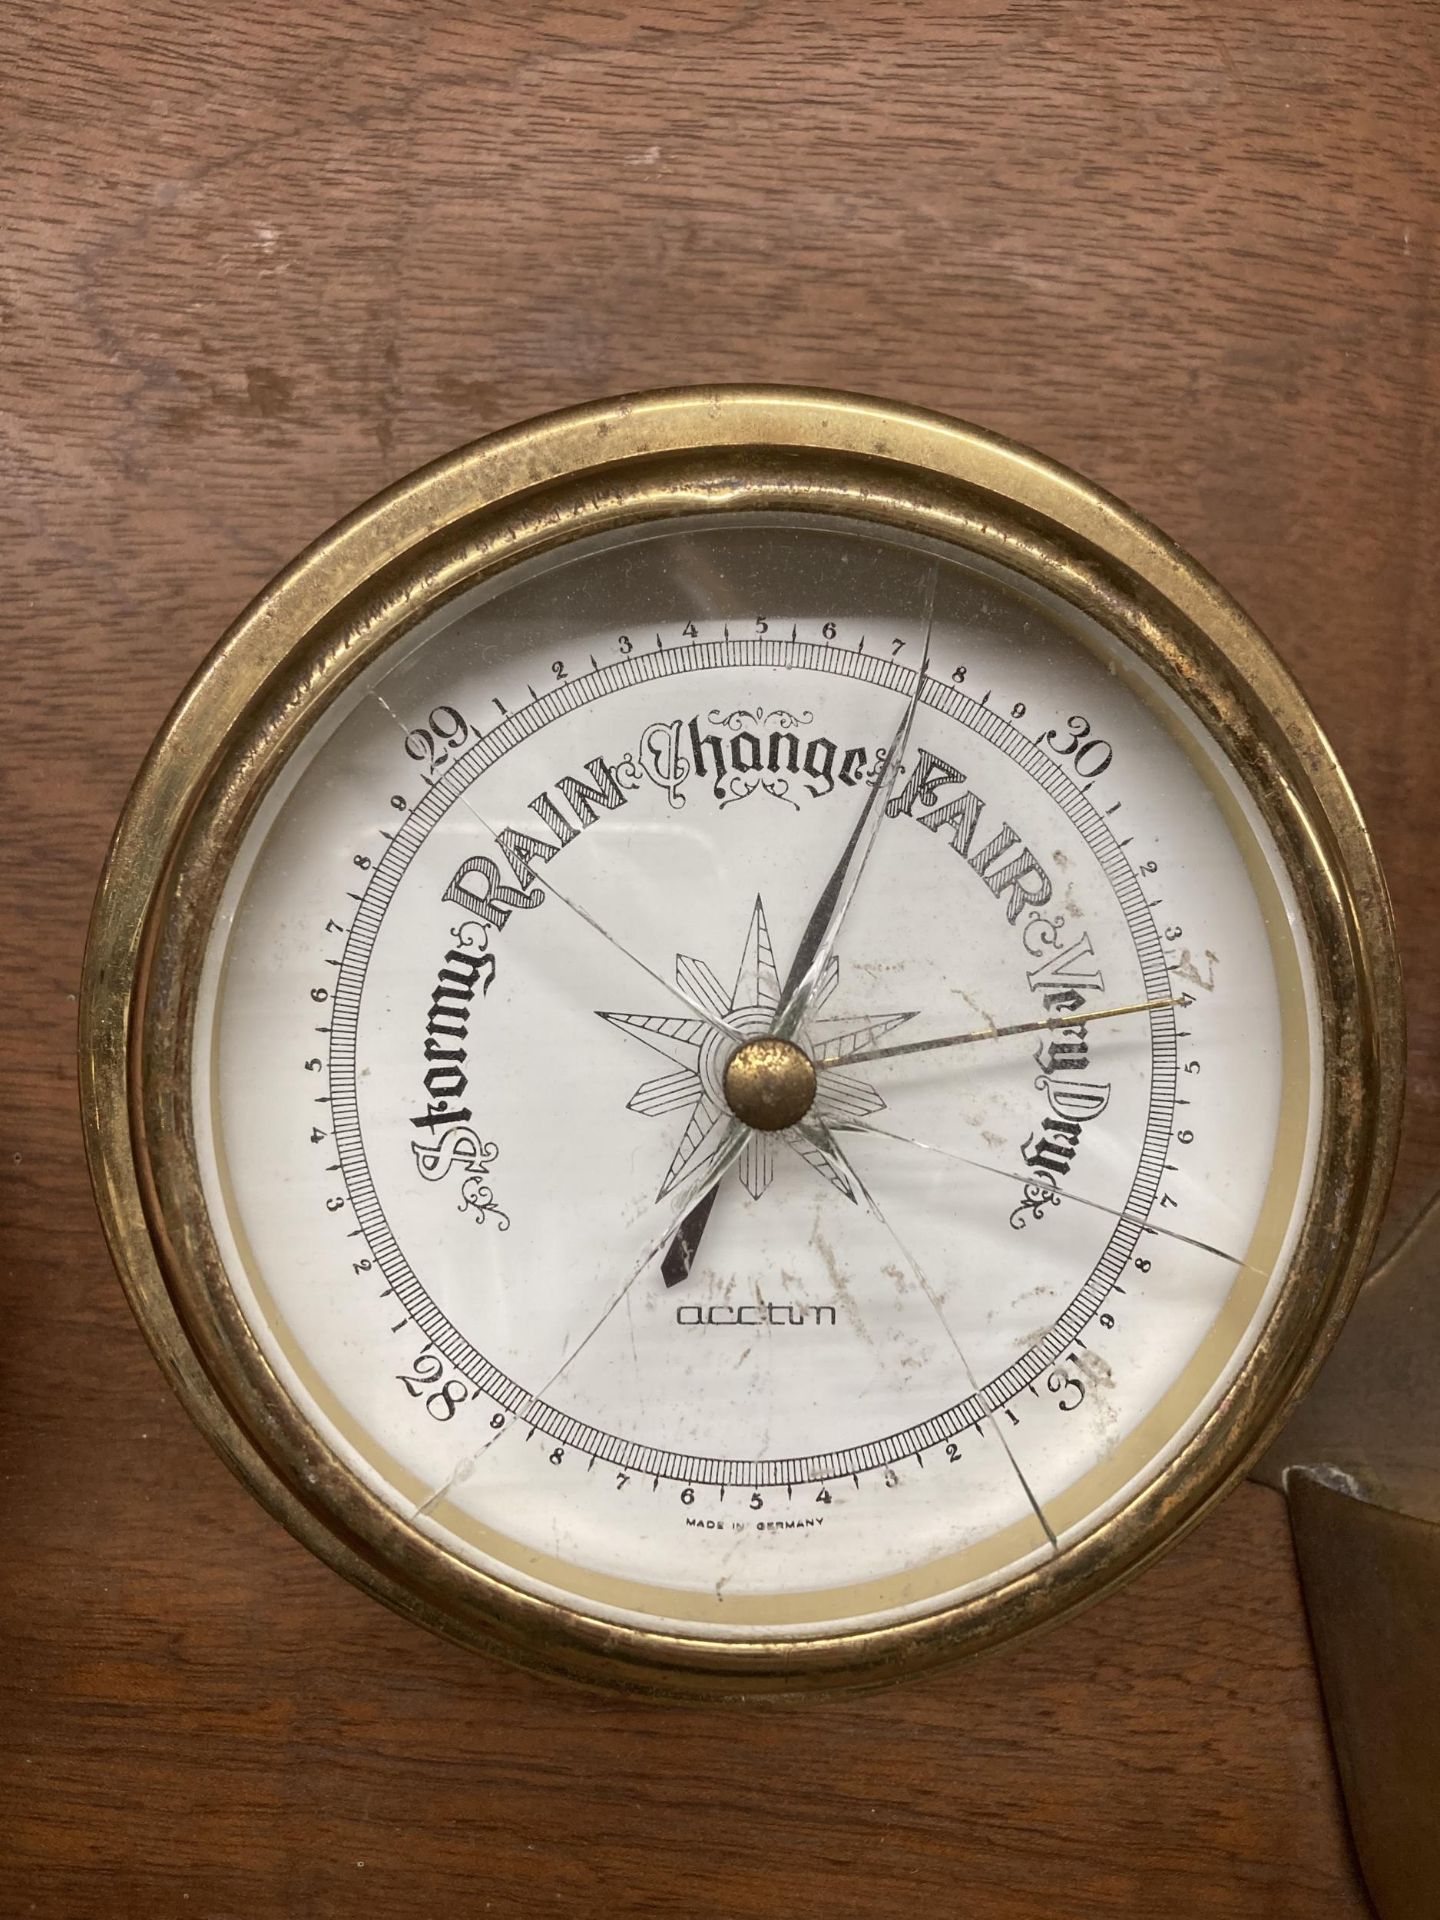 A BRASS BAROMETER AND CLOCK ON A WOODEN BASE - Image 2 of 4